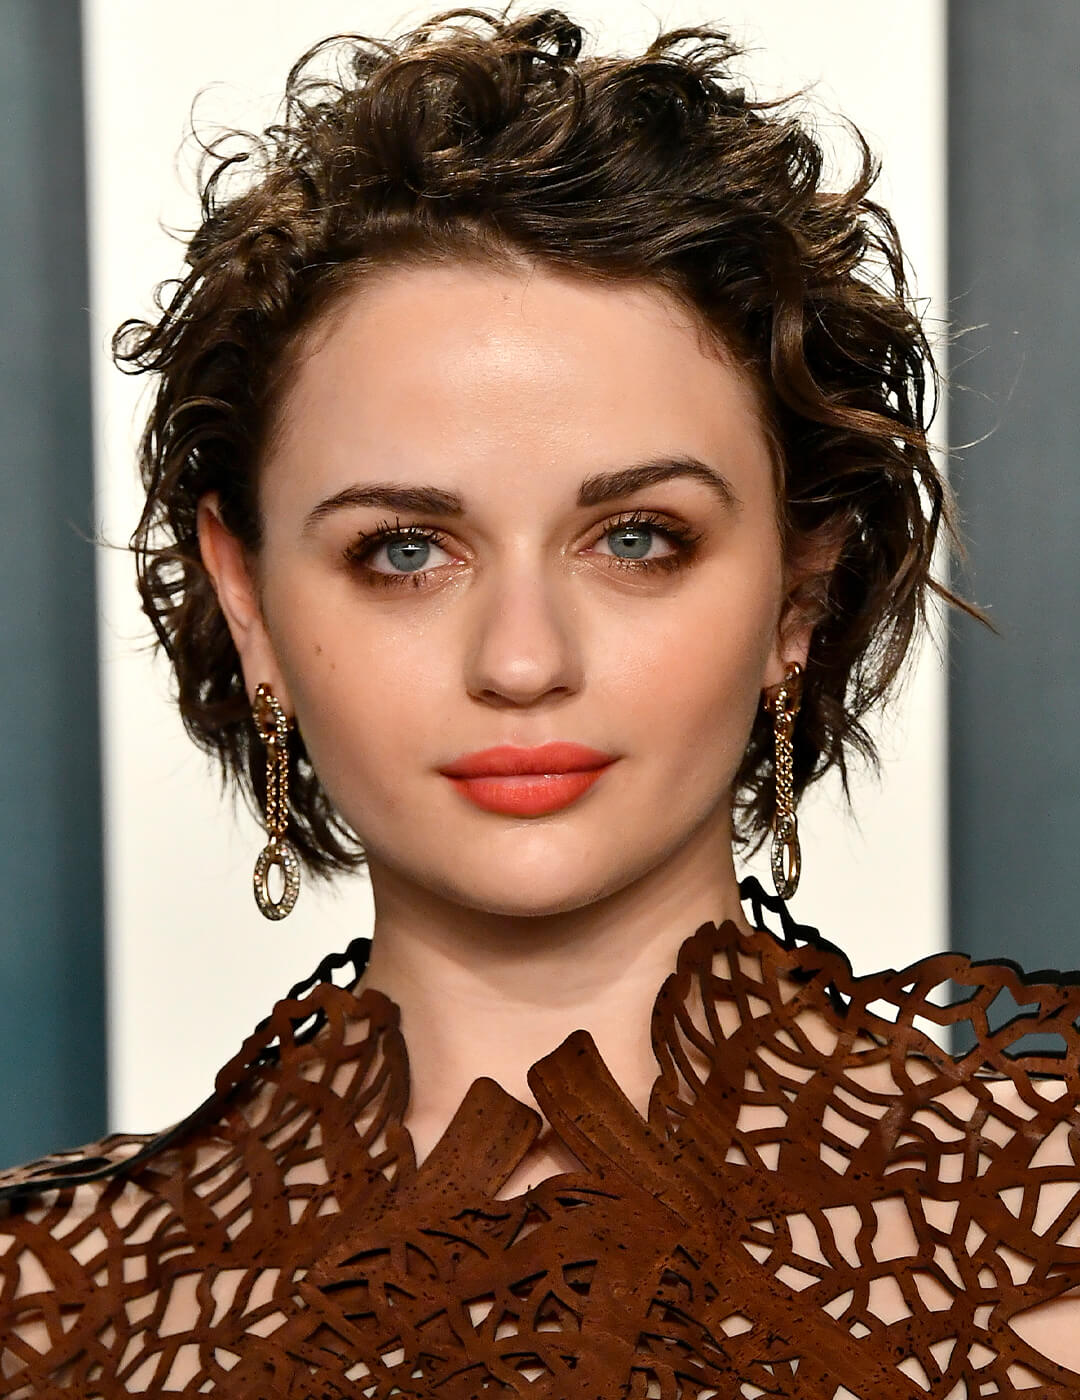 Joey King rocking a mermaid pixie hairstyle and a neutral eye makeup look paired with coral lips